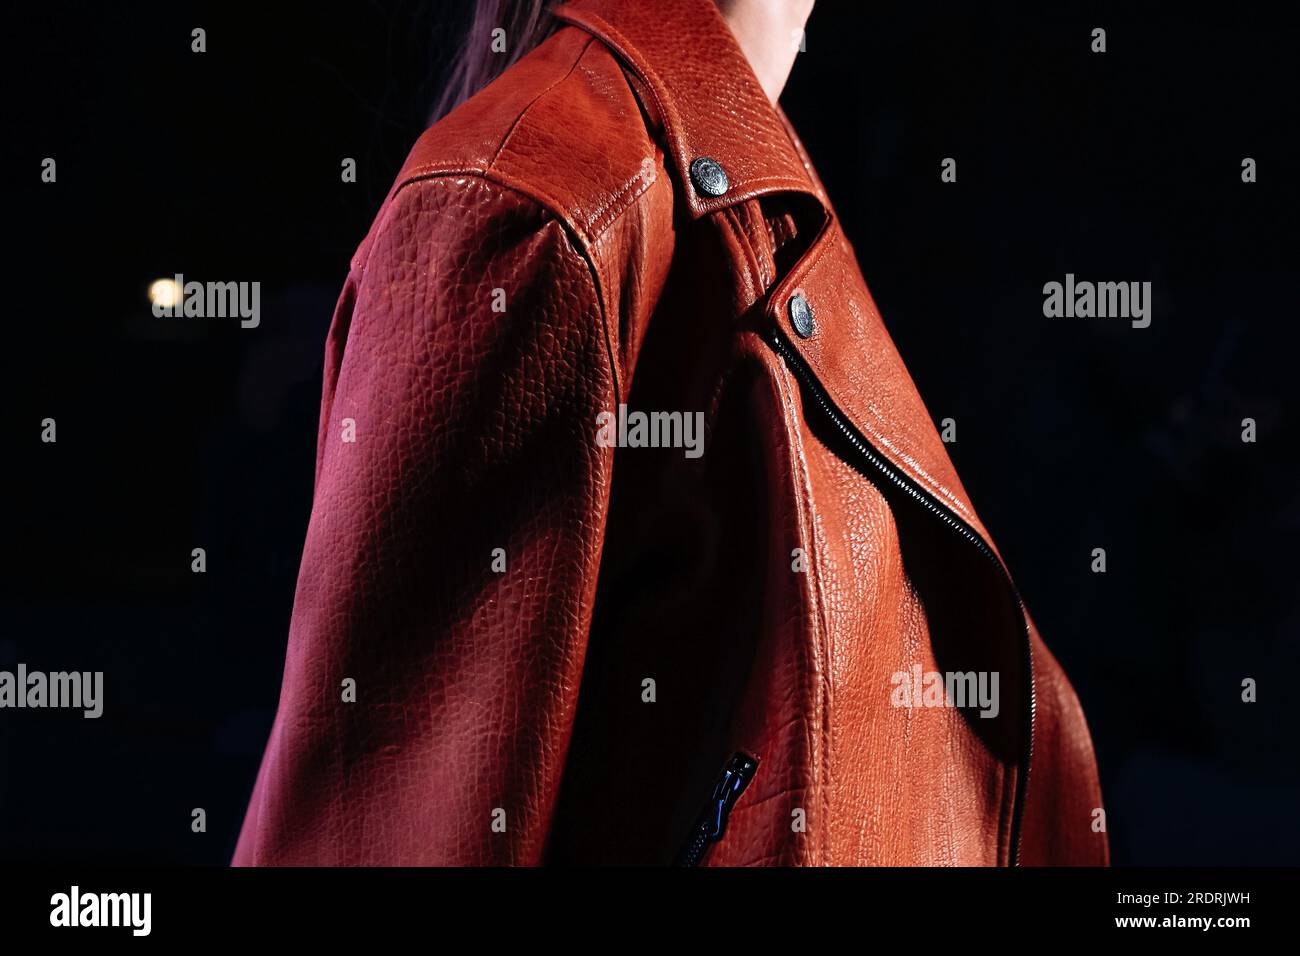 Fashionable details of brown leather classy jacket Designer collection clothes. Stock Photo